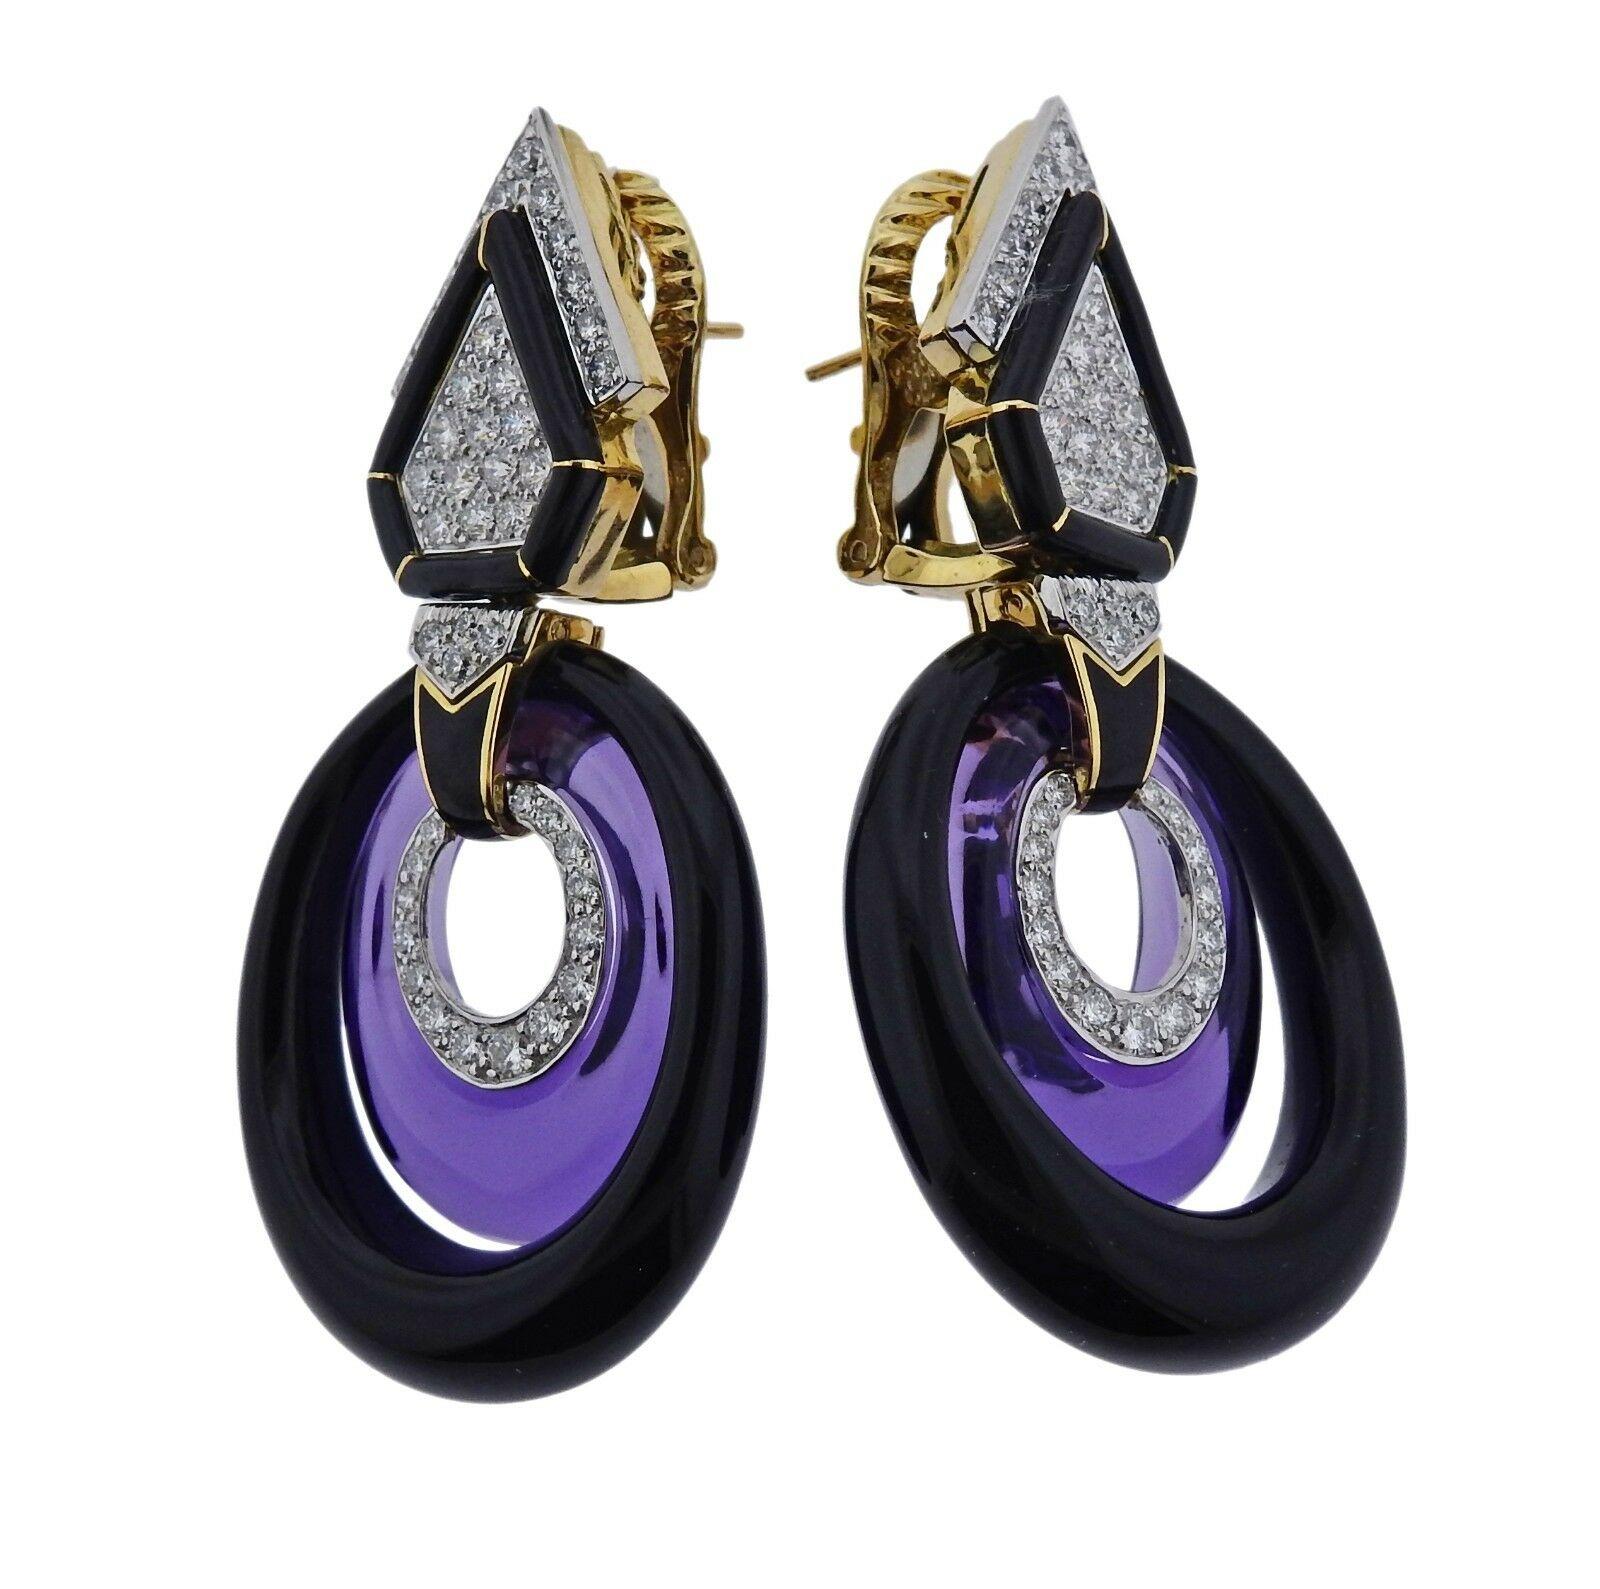 Exquisite pair of 18k gold and platinum earrings crafted by David Webb. Earrings feature amethyst and onyx, are set with approximately 1.80ctw of G/VS diamonds. Earrings measure 58mm long X 26mm at widest point, weight is 30.4 grams. Marked David